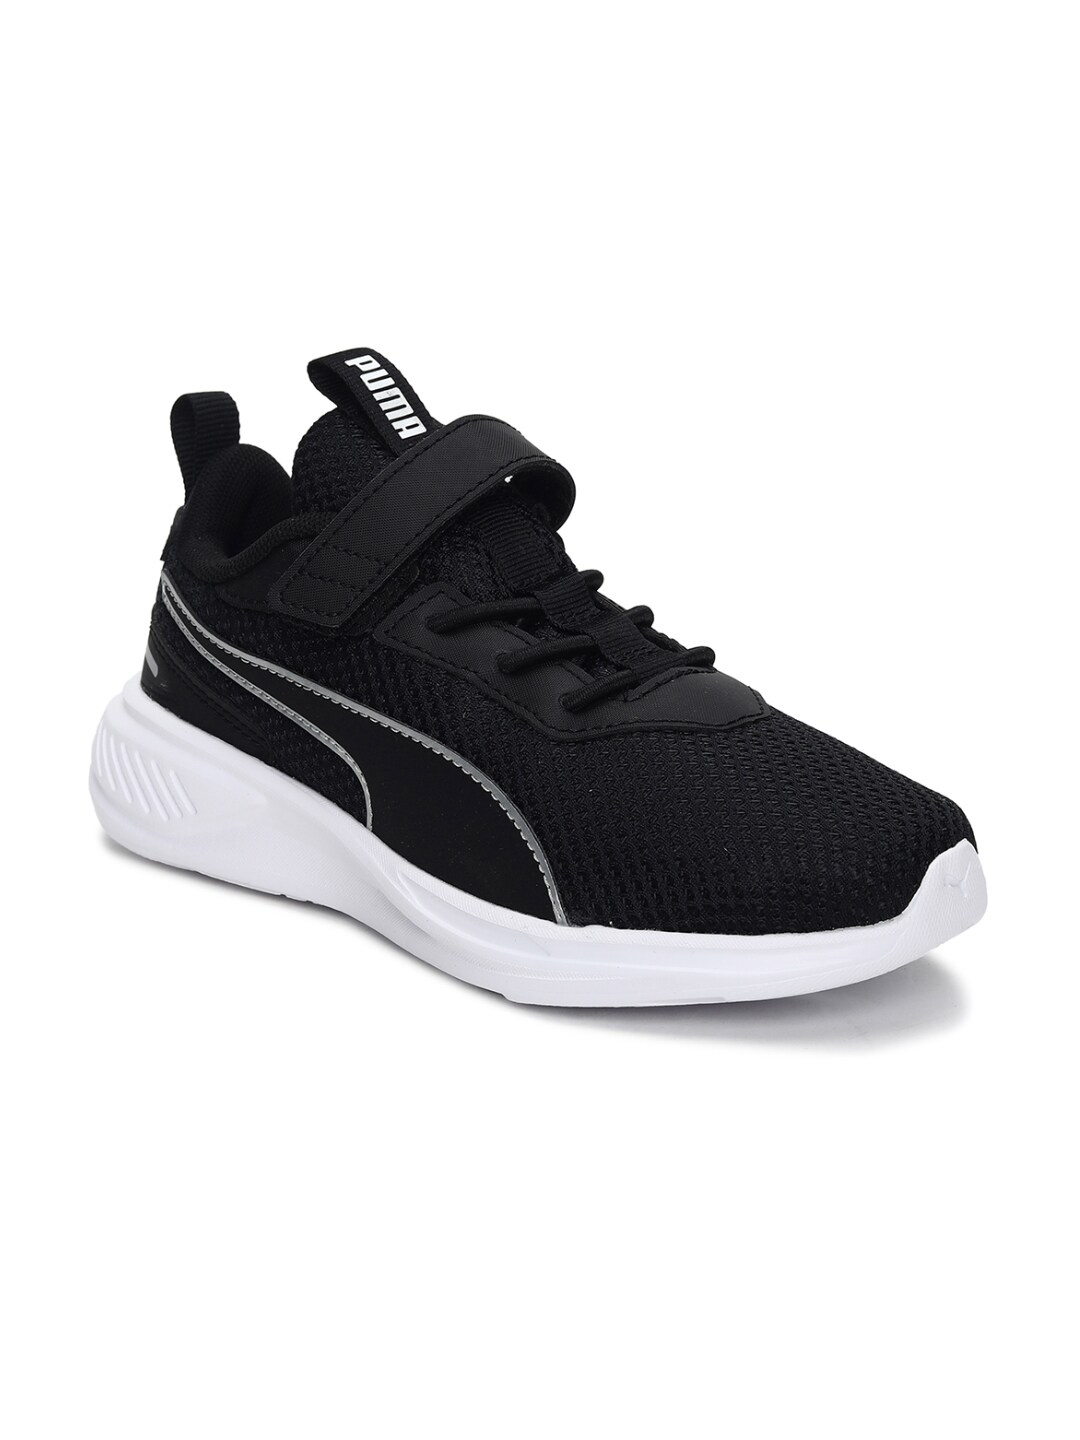 Buy Puma Unisex Kids Black Textile Running Shoes - Sports Shoes for